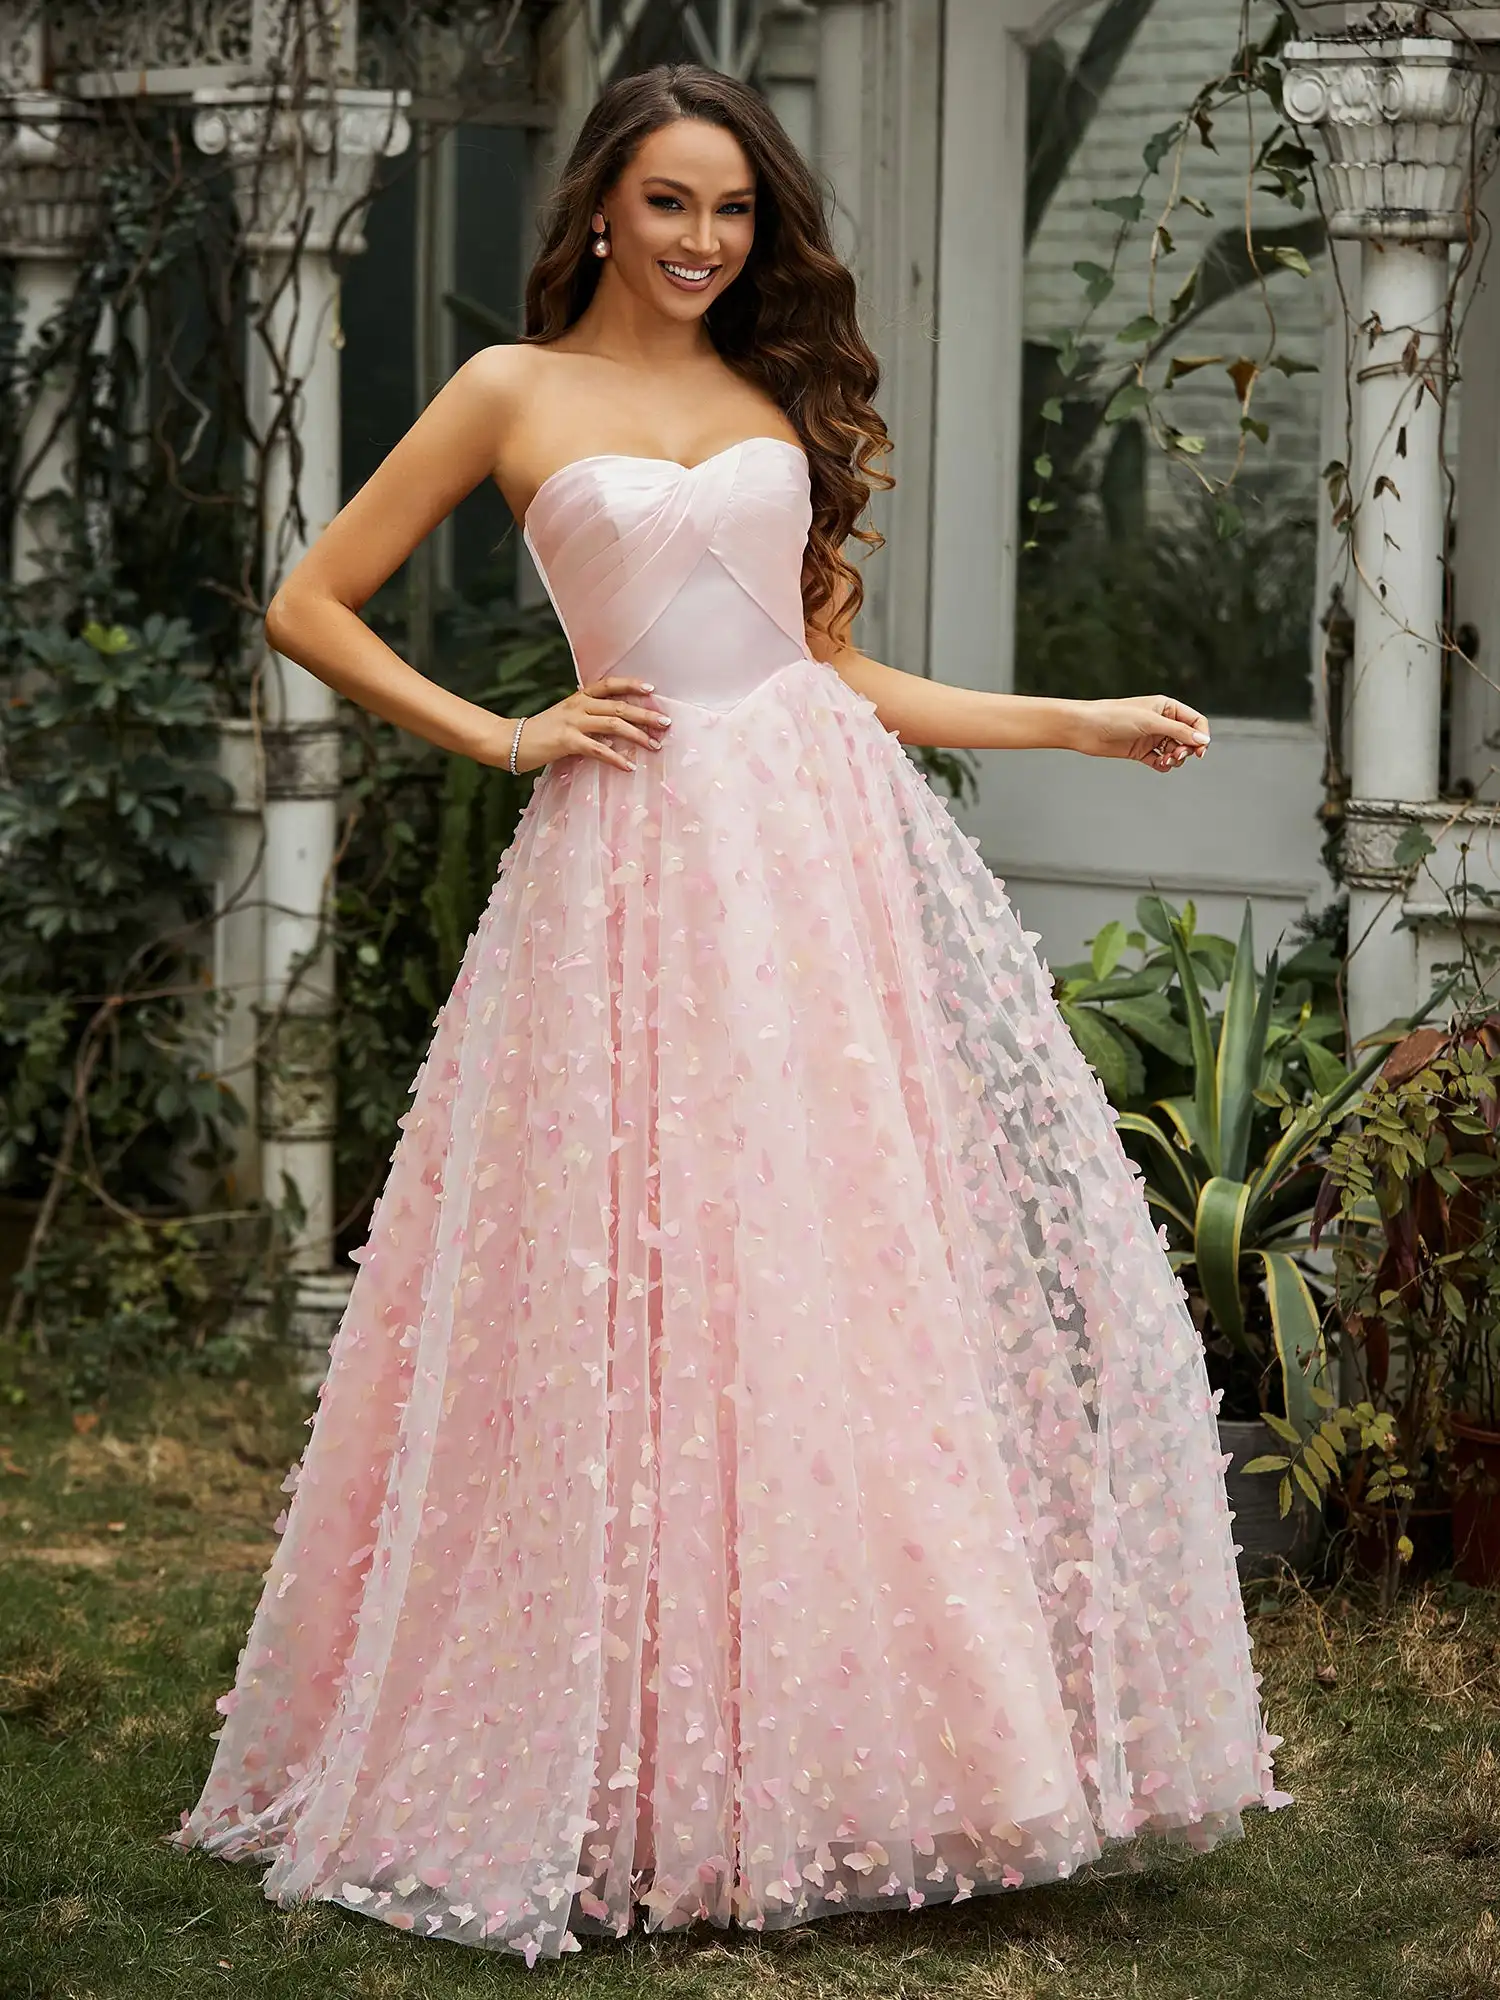 

Women Sweetheart Neck Butterflies Appliqued Ball Gown Strapless A Line Long Prom Dress Open Back Lace Up Evening Party Dresses